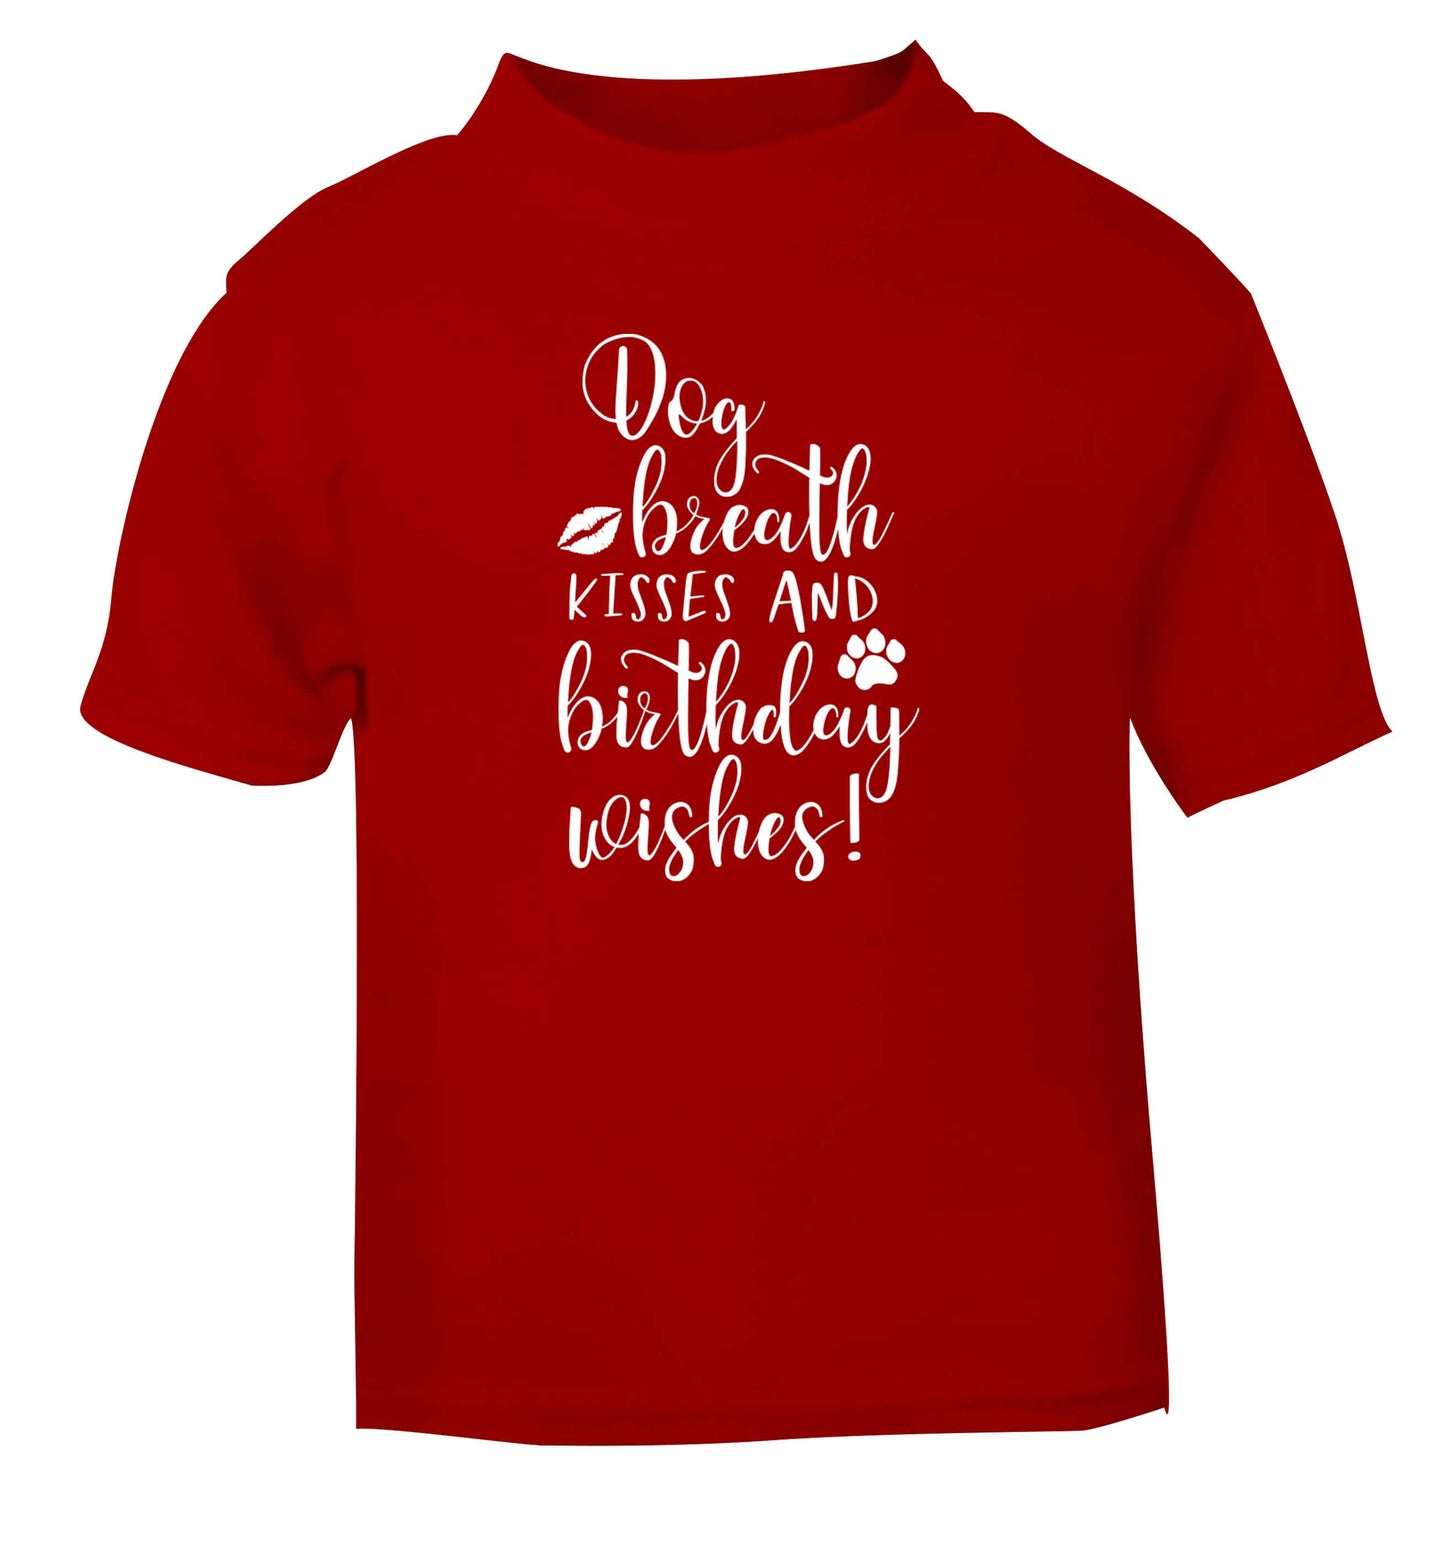 Dog breath kisses and christmas wishes red Baby Toddler Tshirt 2 Years